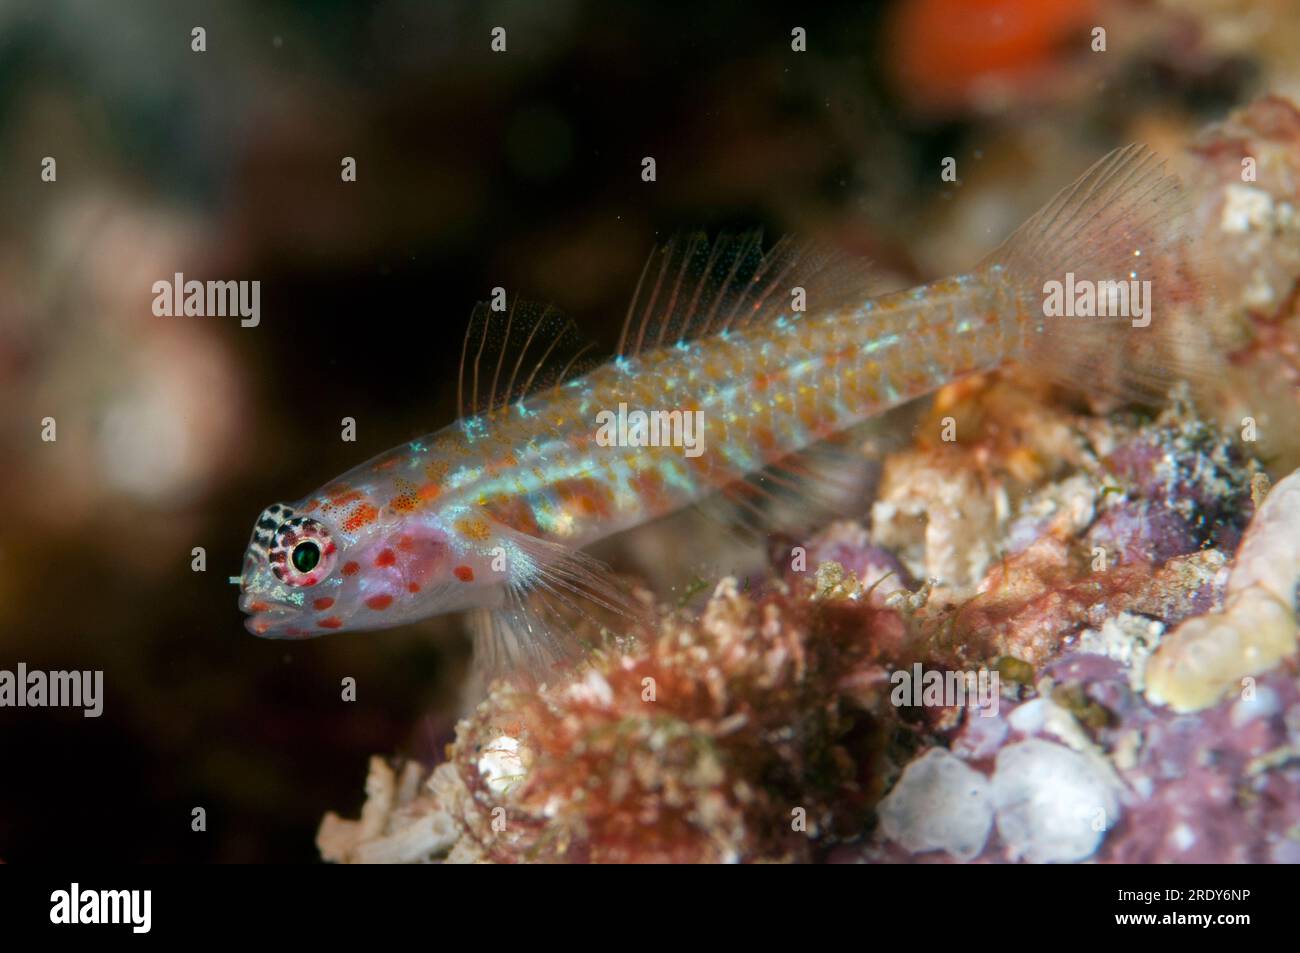 Spotted Pygmygoby, Eviota guttata), Whale Rock dive site, Fiabacet Island, Raja Ampat, West Papua, Indonesia Stock Photo